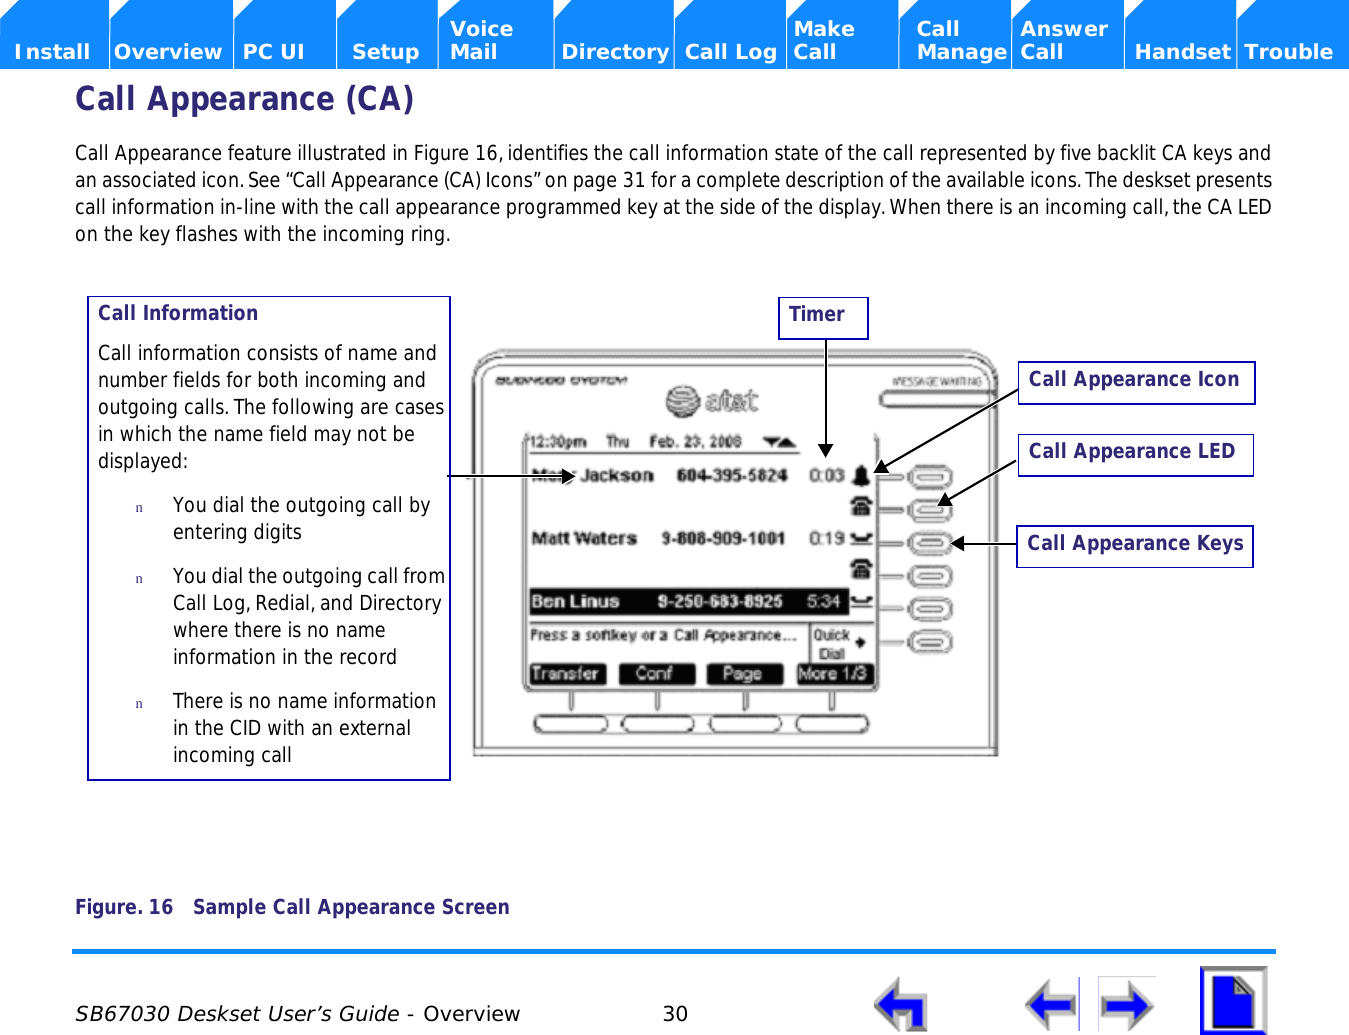 Voice Make Call Answer  Install Overview PC UI Setup Mail Directory Call Log Call Manage Call Handset  Trouble SB67030 Deskset User’s Guide - Overview 30    Call Appearance (CA)Call Appearance feature illustrated in Figure 16, identifies the call information state of the call represented by five backlit CA keys and an associated icon. See “Call Appearance (CA) Icons” on page 31 for a complete description of the available icons. The deskset presents call information in-line with the call appearance programmed key at the side of the display. When there is an incoming call, the CA LED on the key flashes with the incoming ring. Figure. 16 Sample Call Appearance ScreenTimerCall InformationCall information consists of name and number fields for both incoming and outgoing calls. The following are cases in which the name field may not be displayed:nYou dial the outgoing call by entering digits nYou dial the outgoing call from Call Log, Redial, and Directory where there is no name information in the record nThere is no name information in the CID with an external incoming callCall Appearance IconCall Appearance LEDCall Appearance Keys 